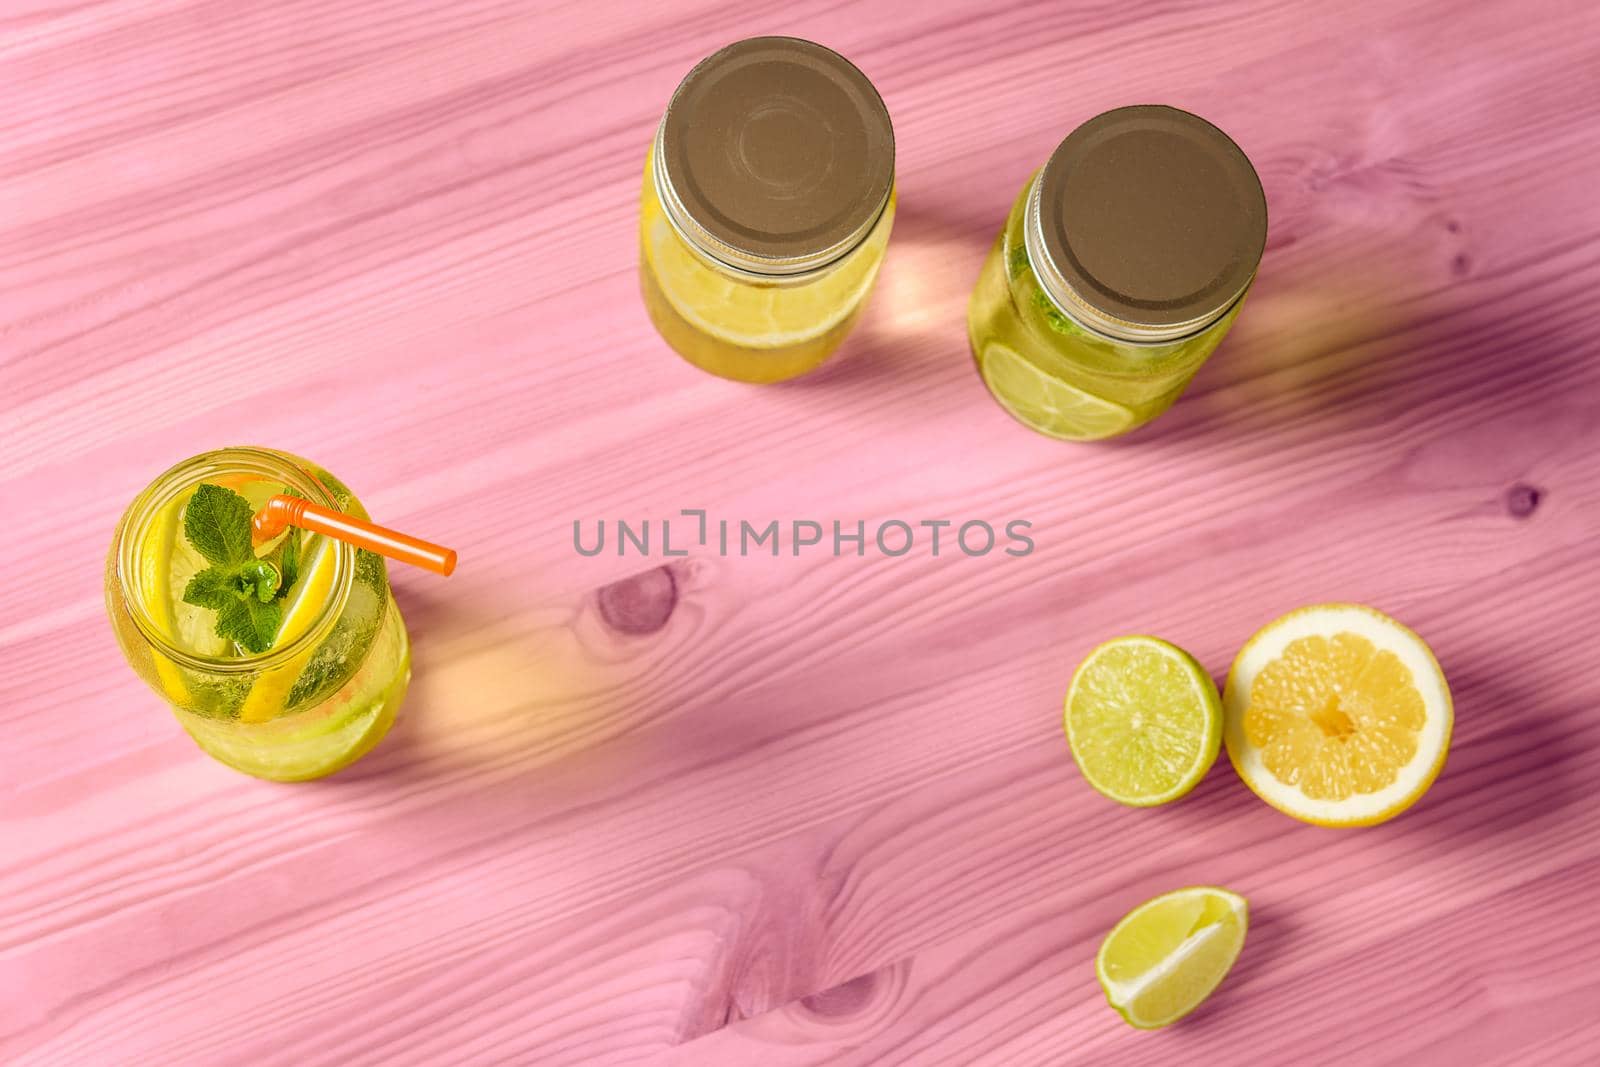 Flat Lay of lemonade with mint and a cane to drink in a glass jar illuminated by sunlight, is on a pink wooden table with two other jars with lid, some pieces of lemon and lime and copy space